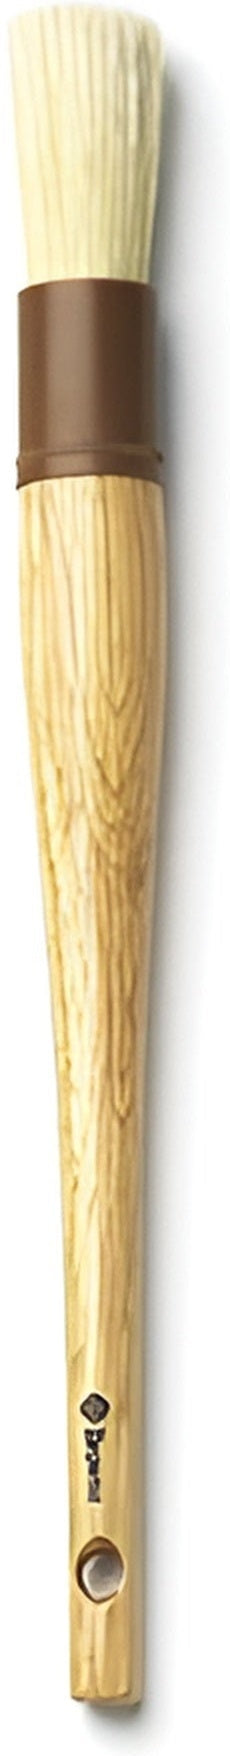 Browne - 1" Wooden Handle Round Pastry Brush - 61200